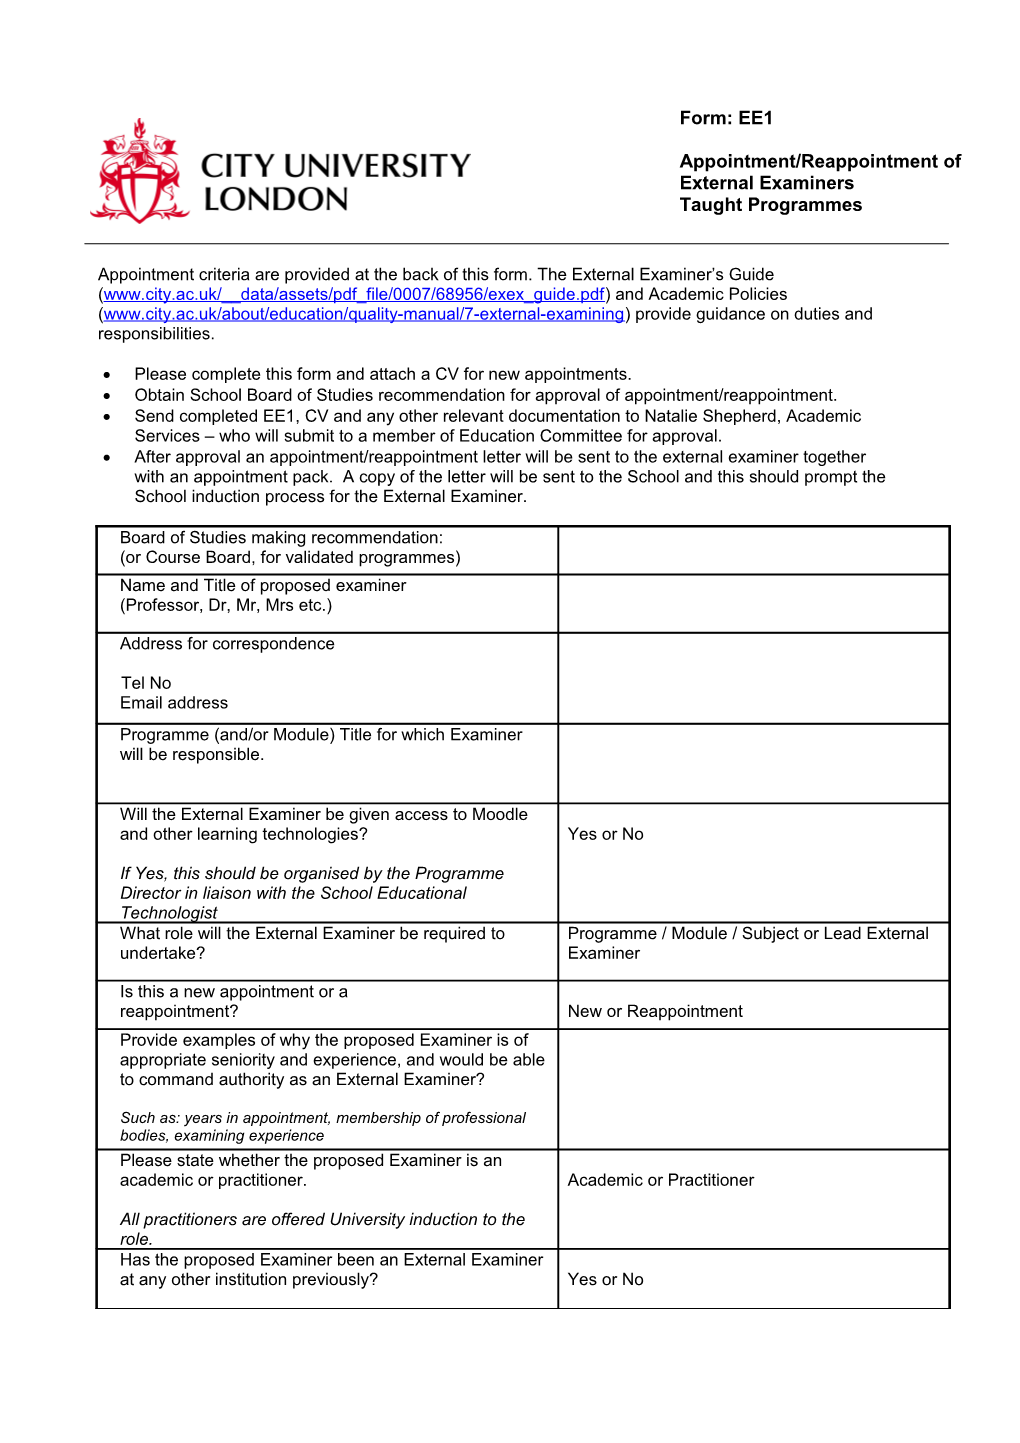 Appointment Criteria Are Provided at the Back of This Form. the External Examiner S Guide